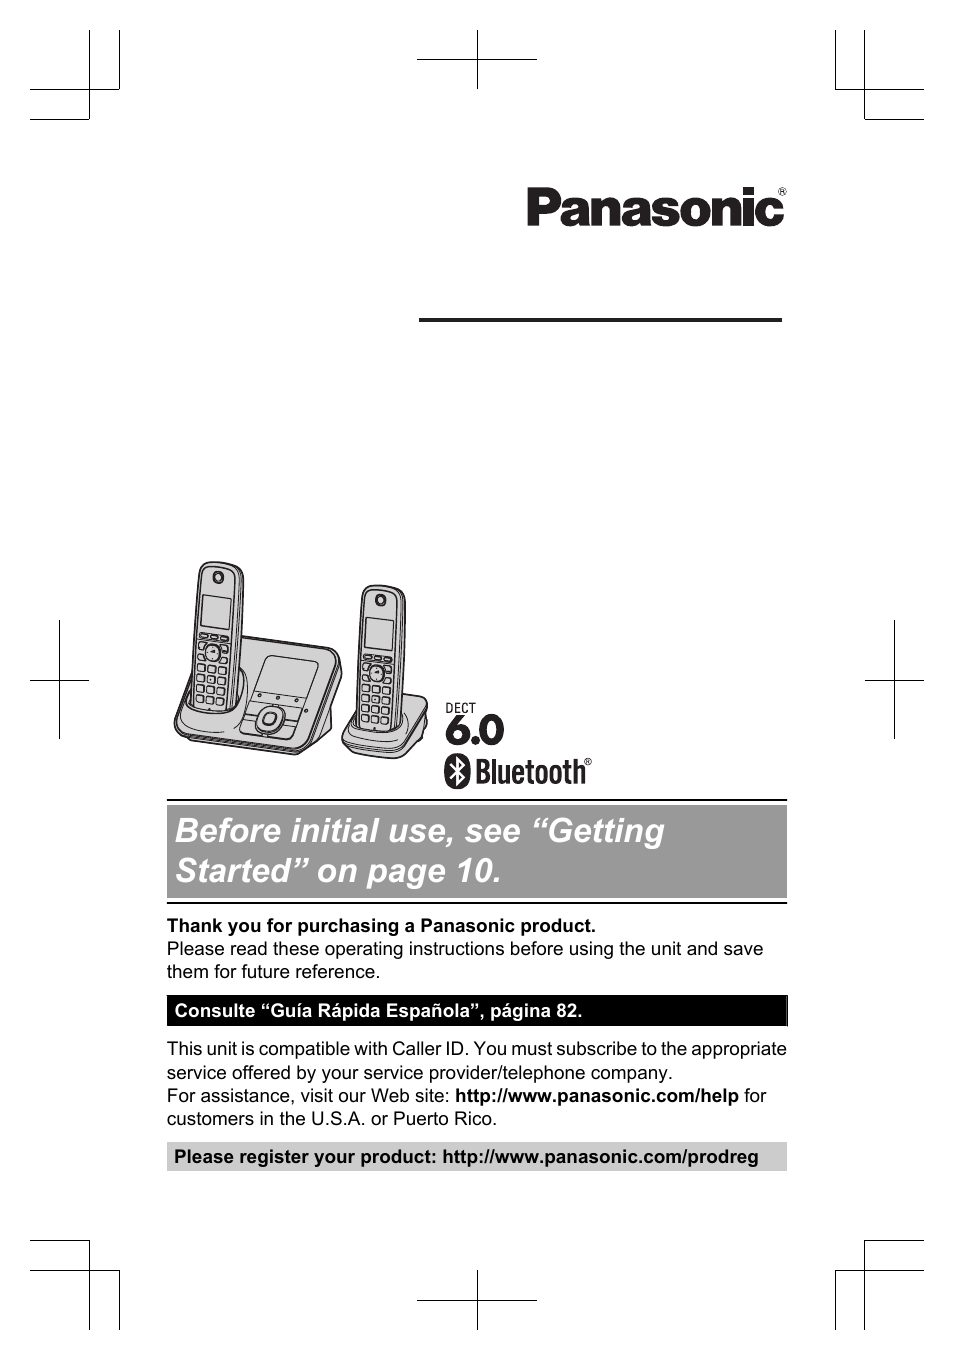 Panasonic KX-TG7644 User Manual | 100 pages | Also for: KX-TG7645, KX